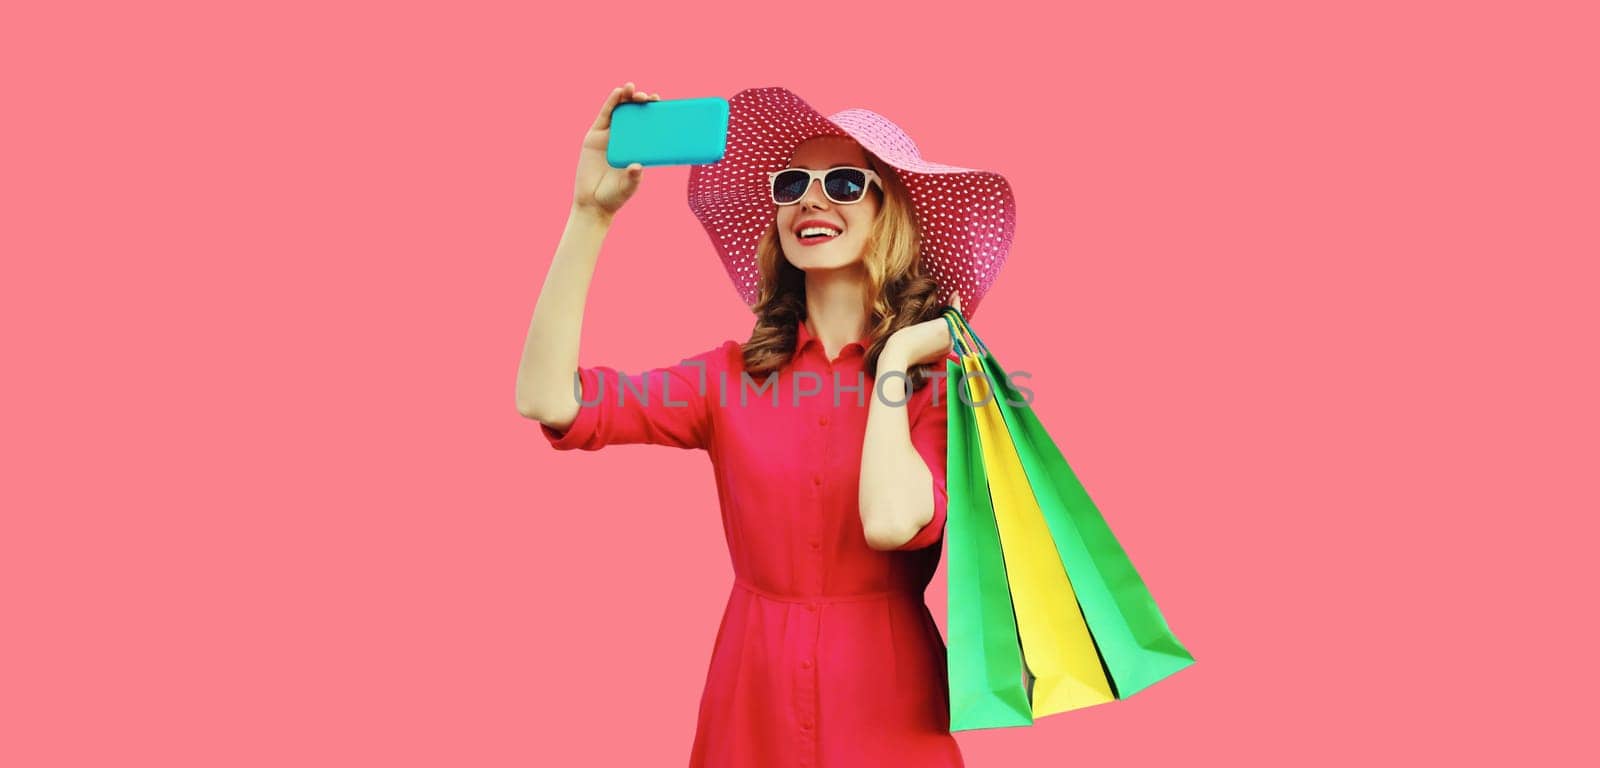 Beautiful happy smiling young woman model taking selfie with mobile phone holding colorful shopping bags in summer straw hat, dress on pink background